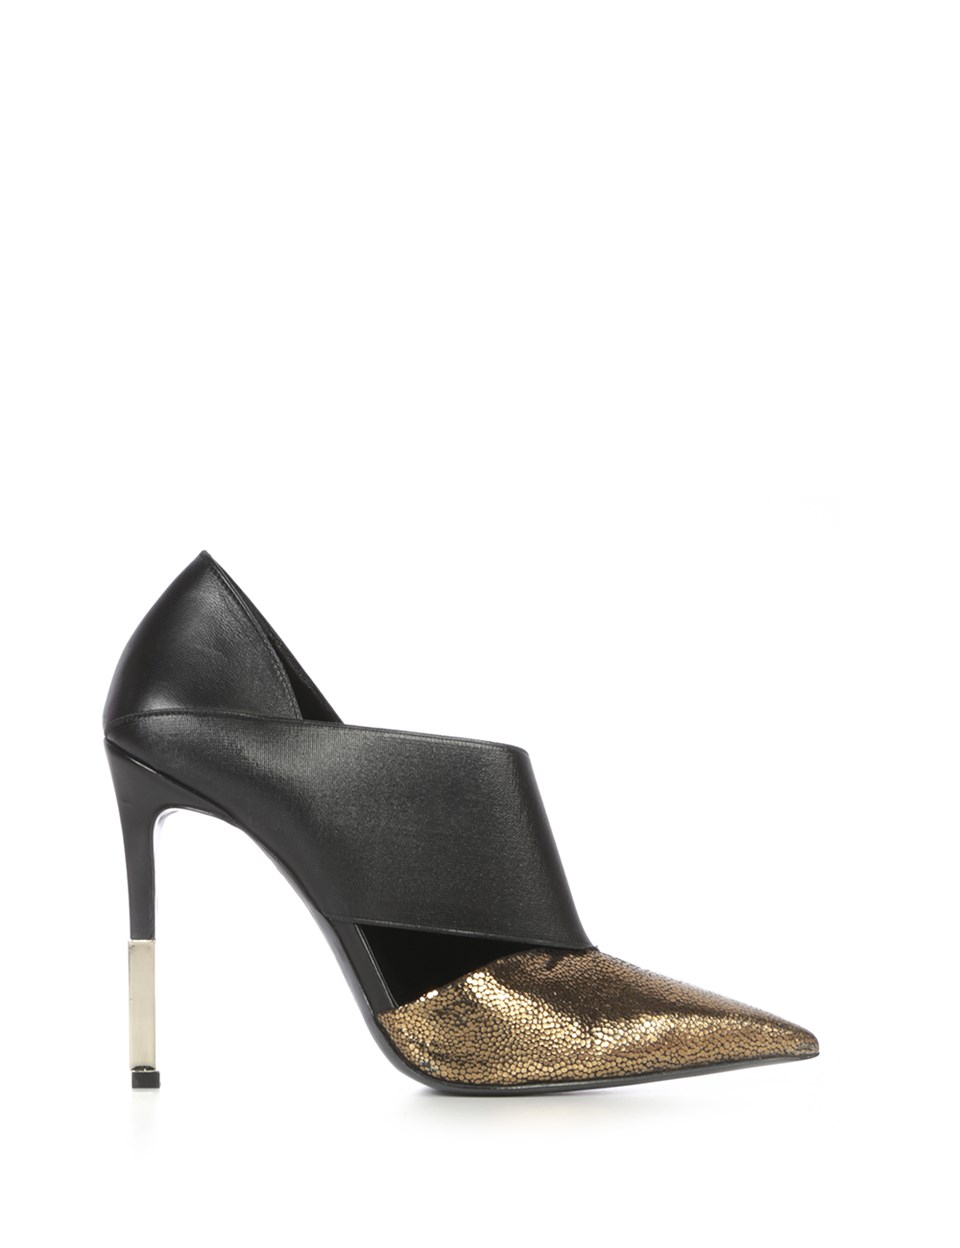 black and gold pumps women's